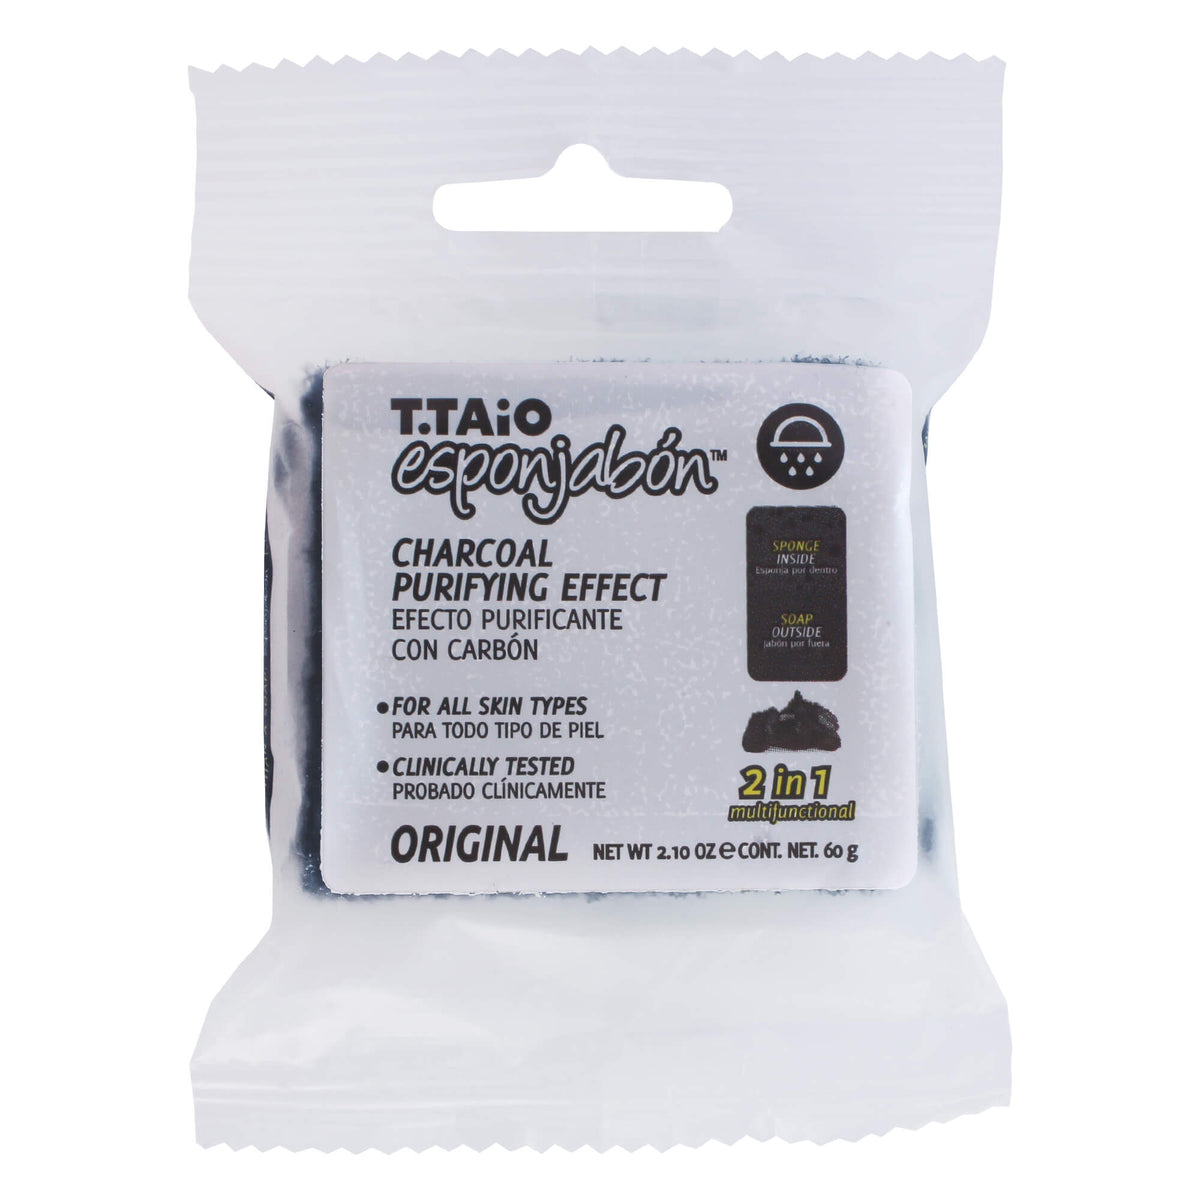 Mini EsponJabon Charcoal, Purifying effect by T.Taio